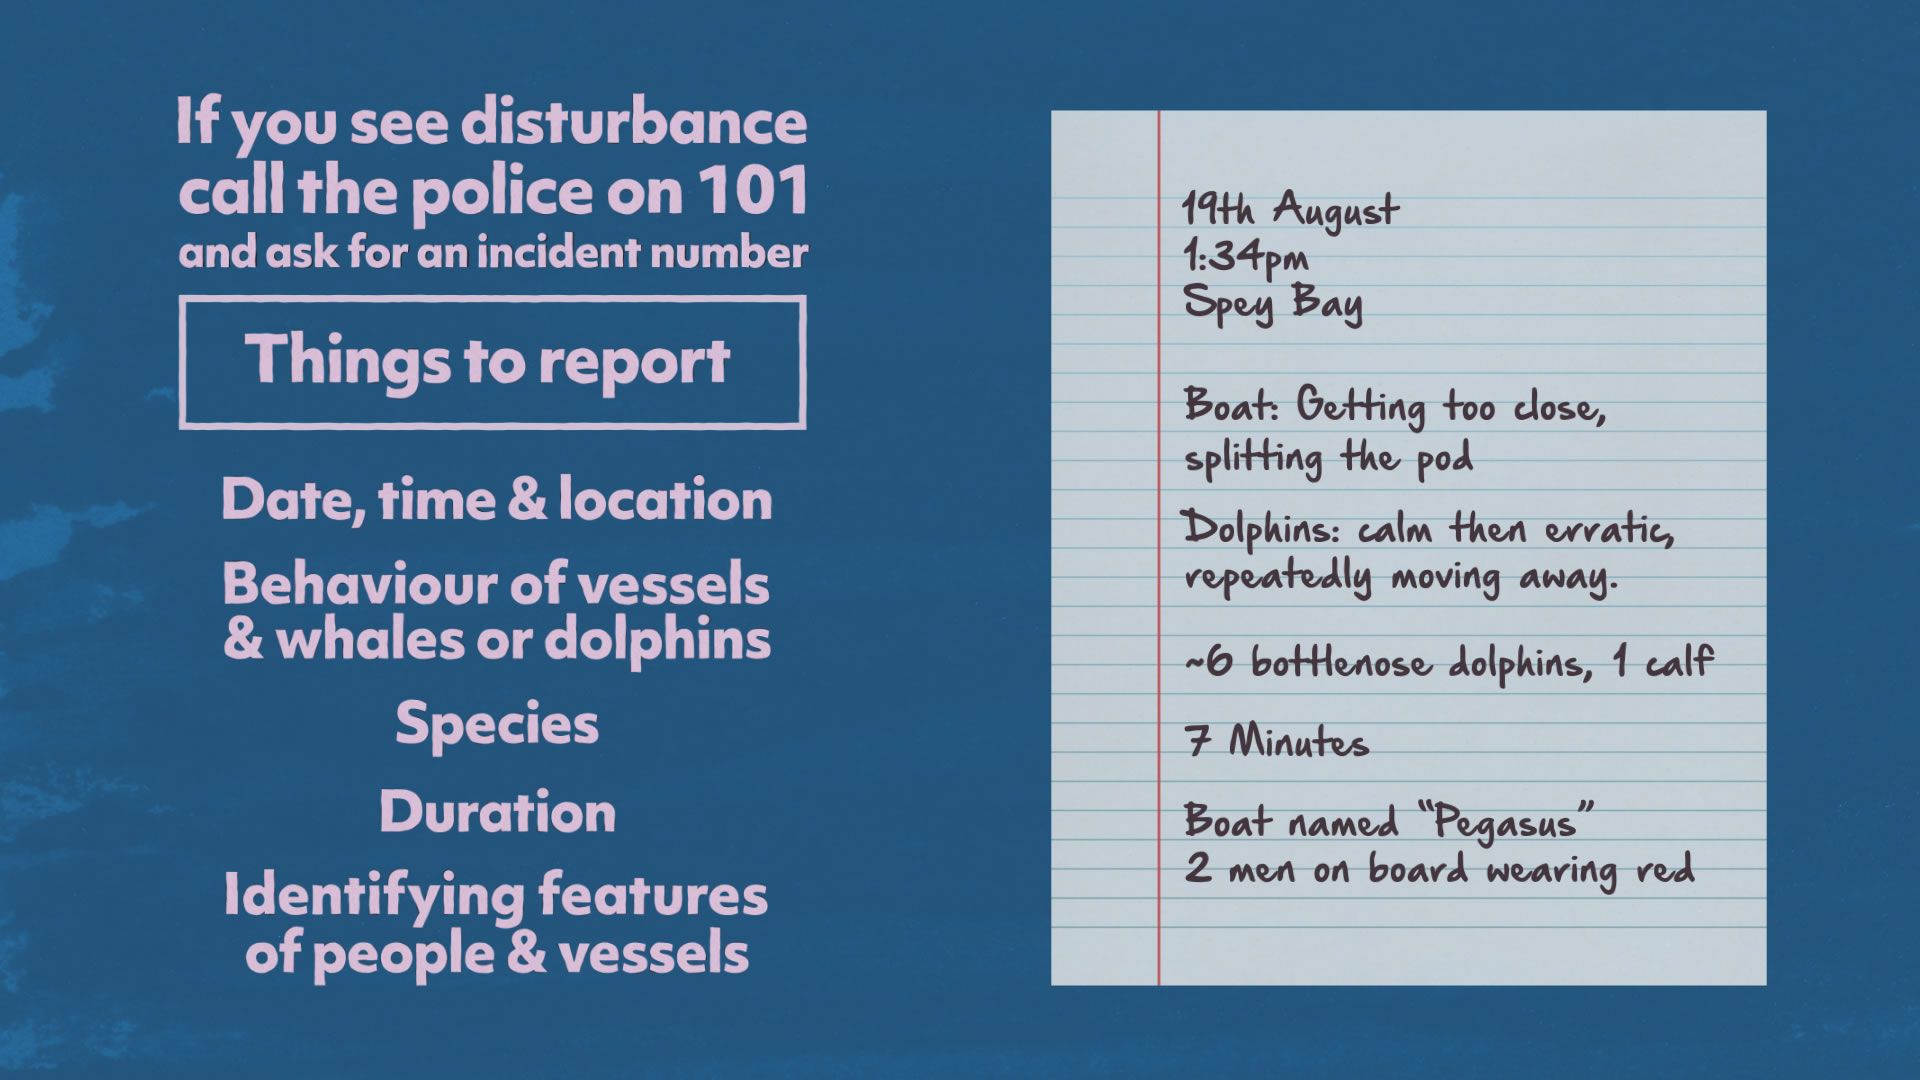 An image with written instructions for reporting disturbance of marine animals